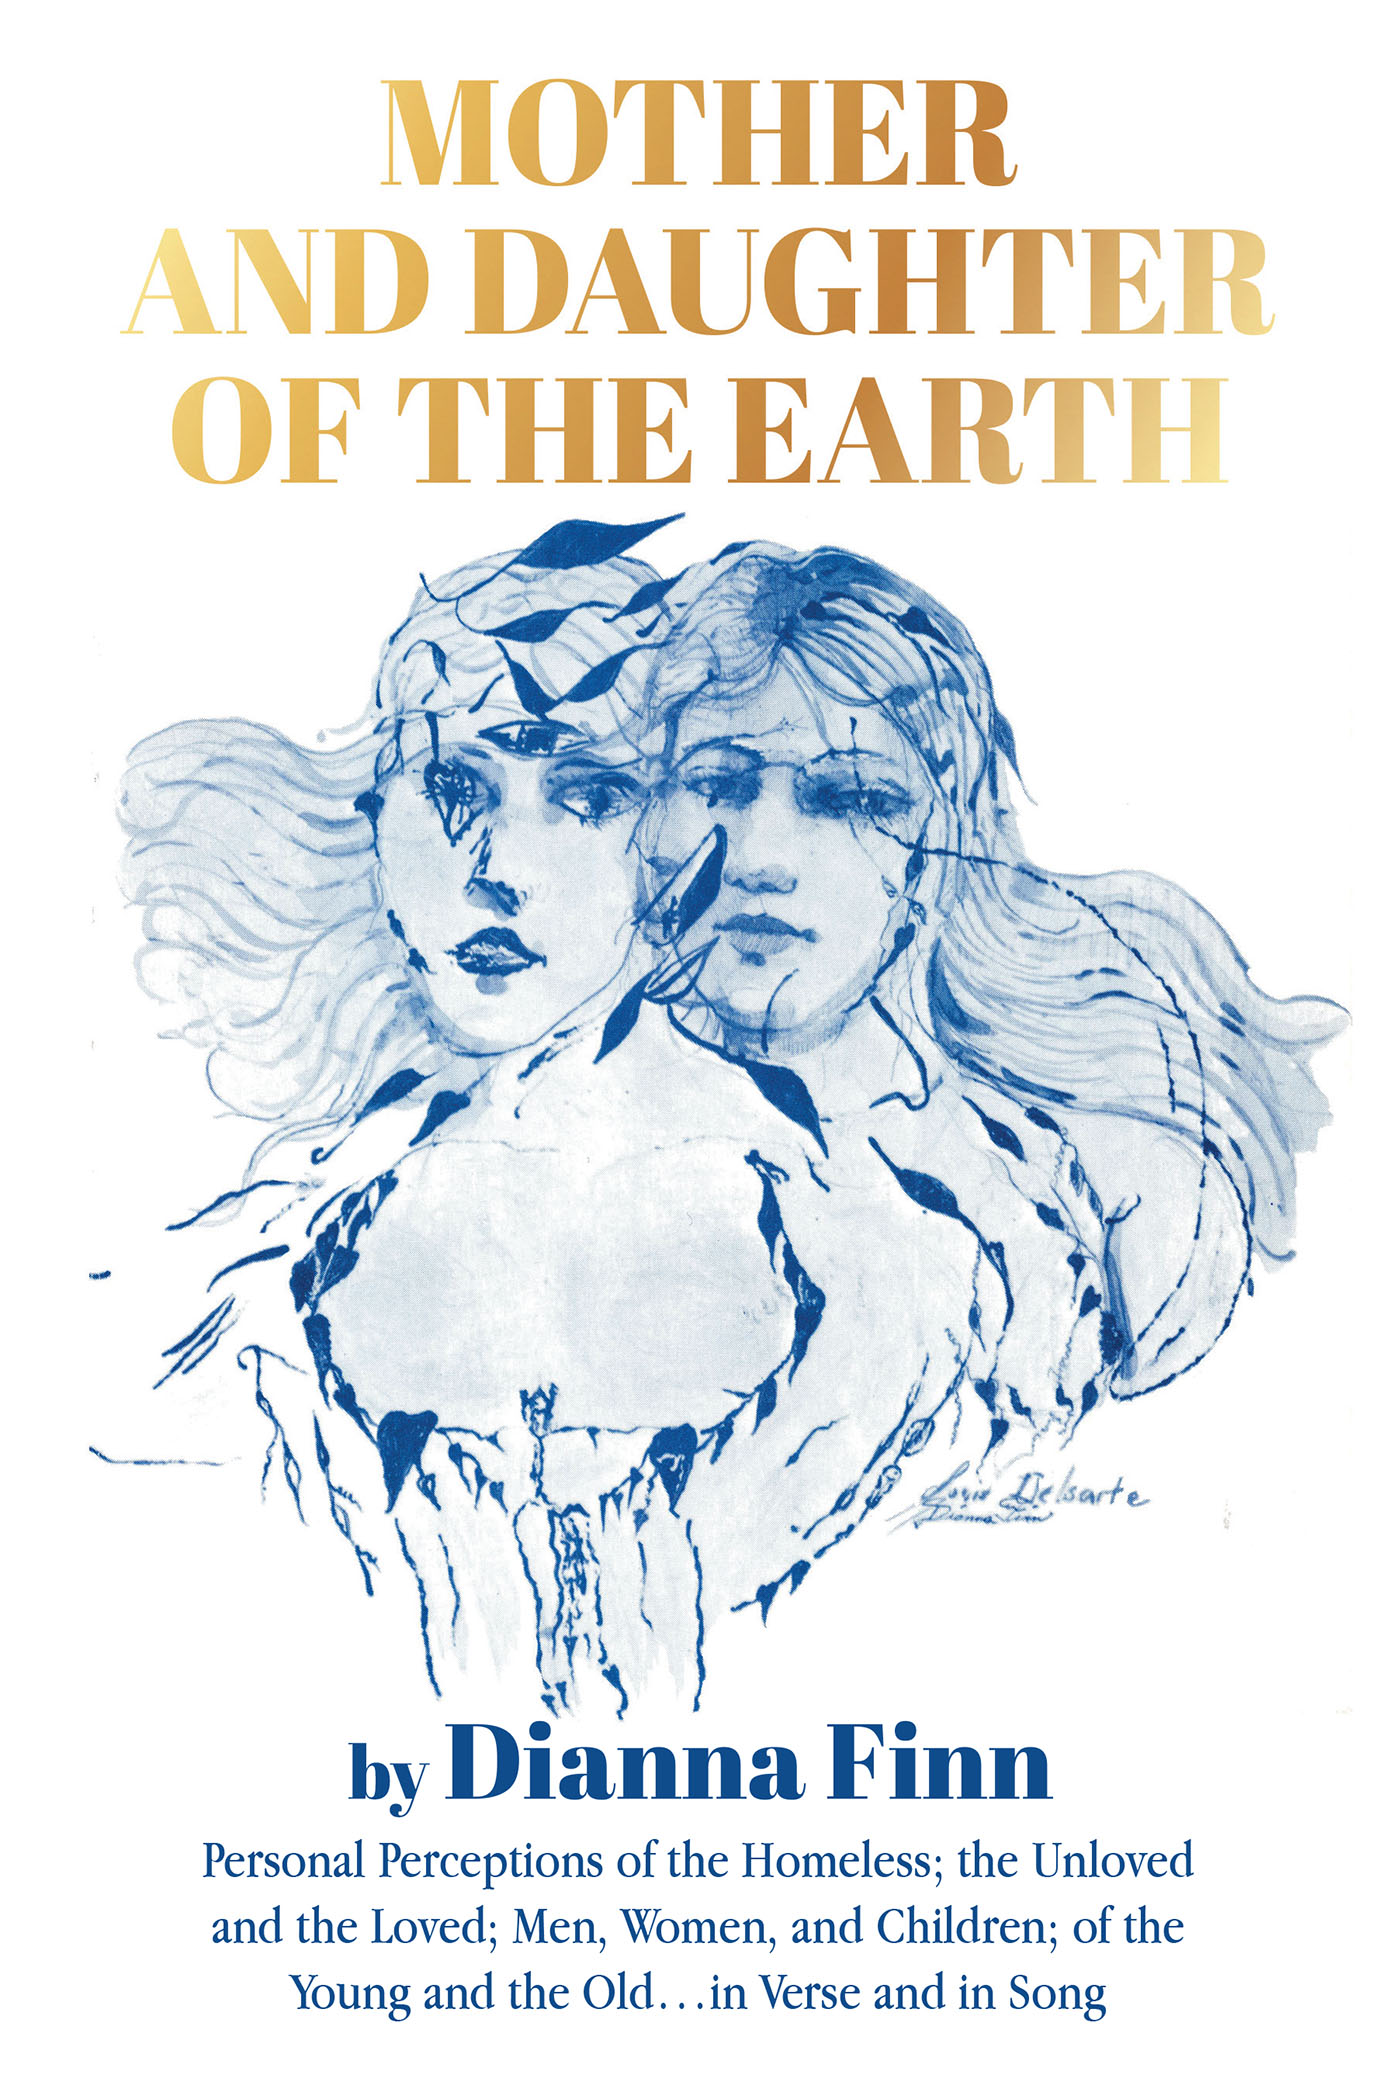 Author Dianna Finn’s Book, "Mother and Daughter of the Earth," is an Assortment of Poems Designed to Awaken Readers to the Evils of the World and Rise Above Them